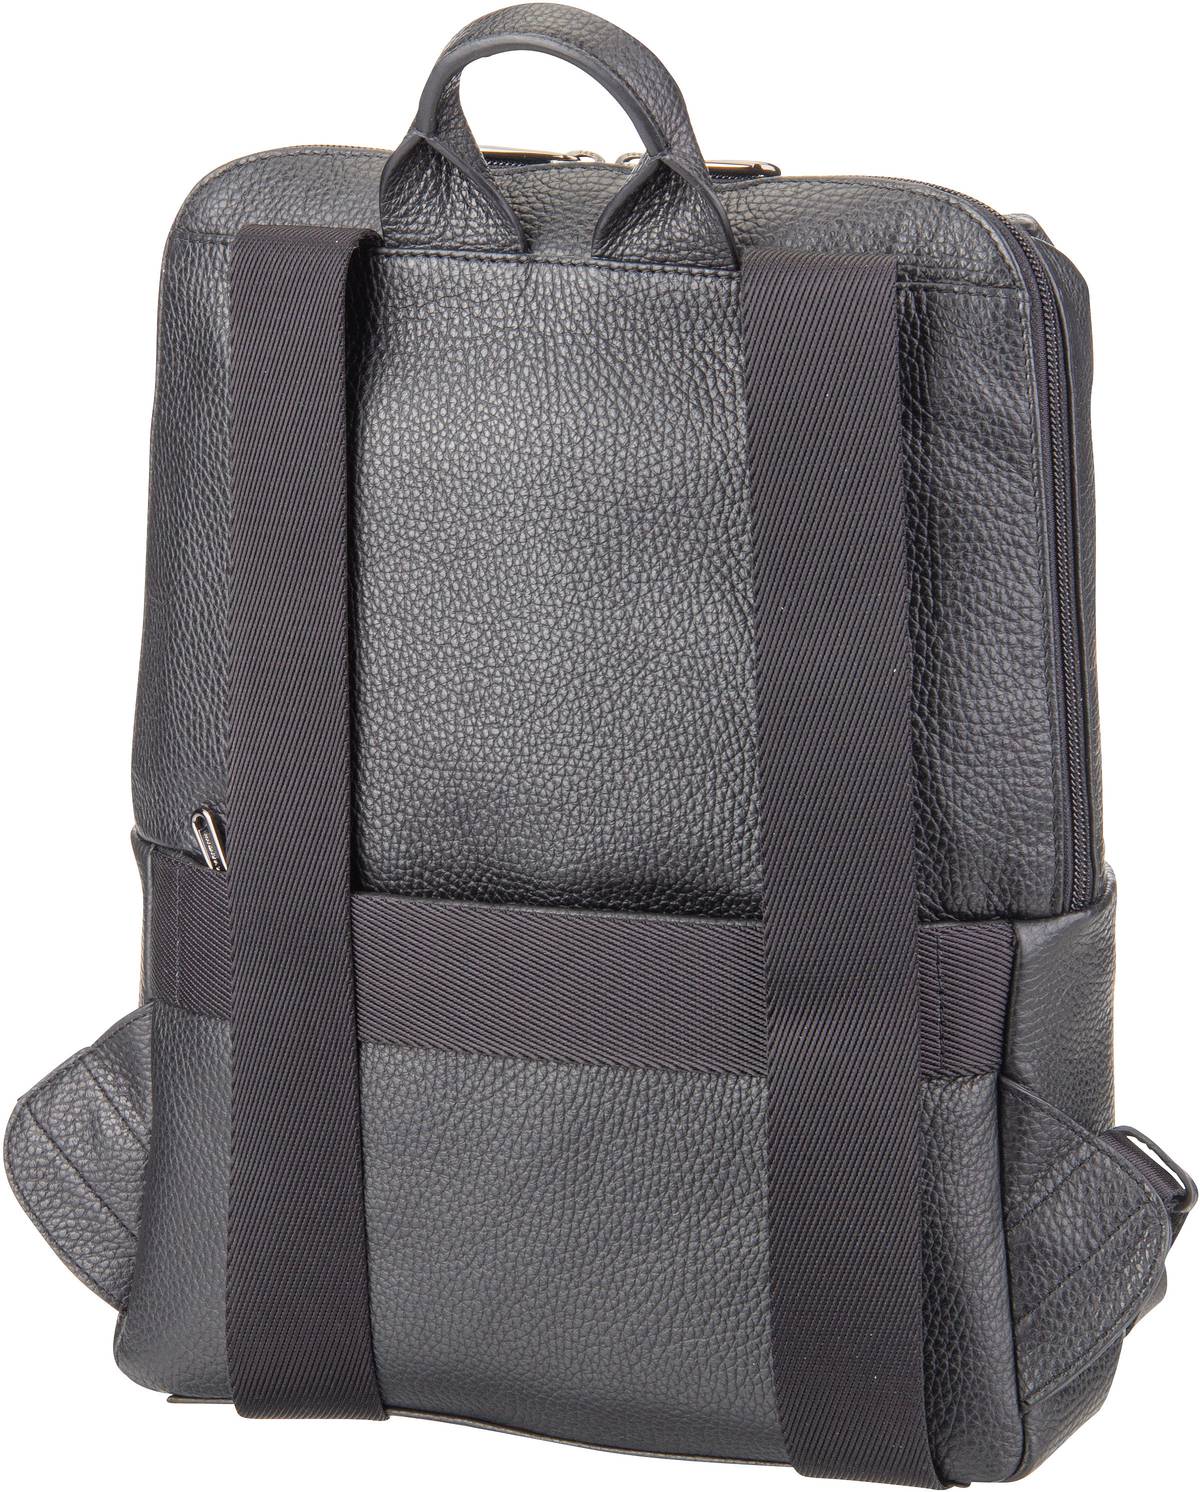 Mandarina Duck Mellow Leather Squared Backpack FZT38 - Nero